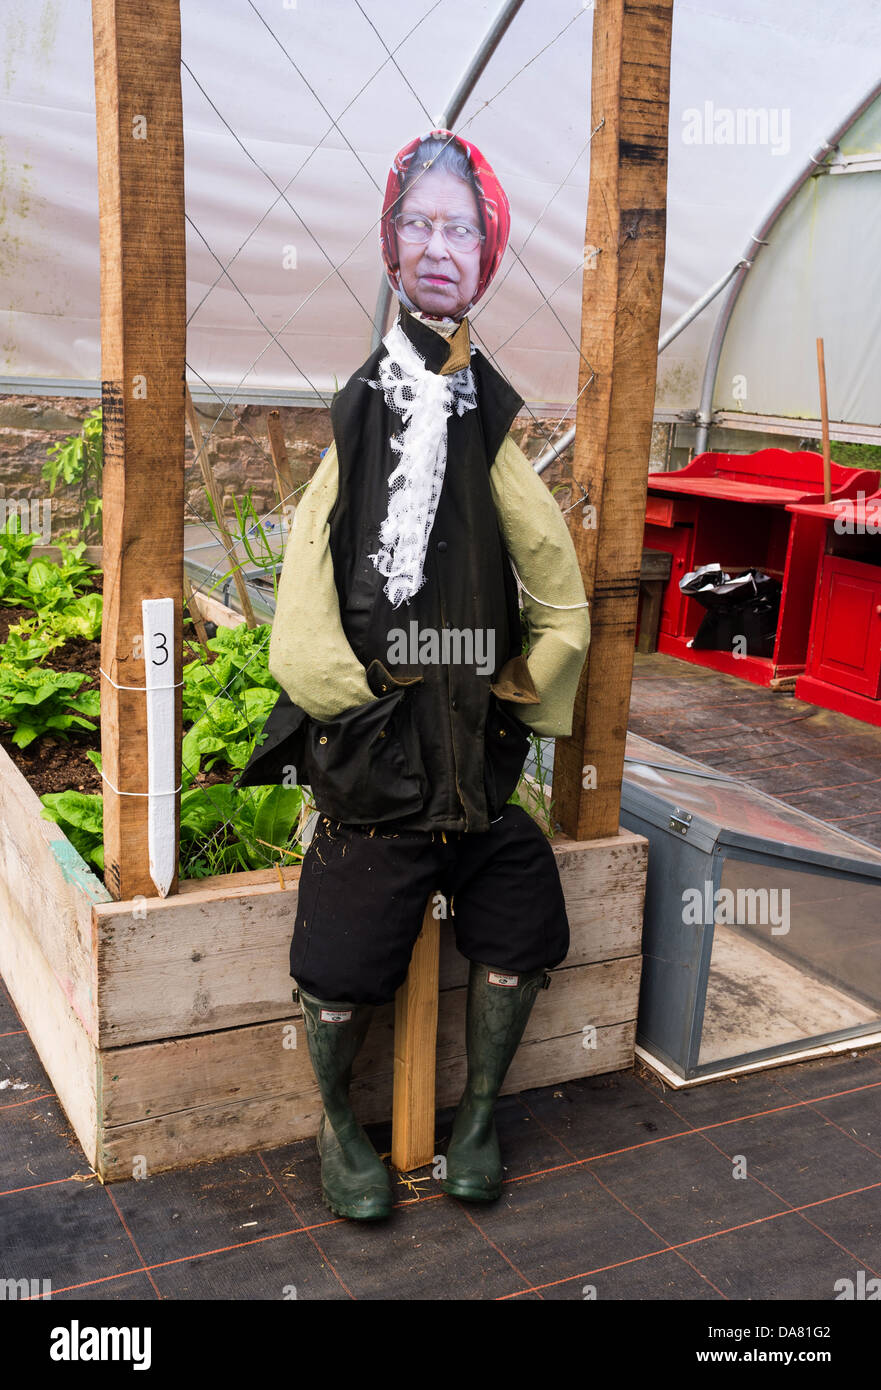 Bolham, Tiverton, Devon, UK. A scarecrow in a greenhouse at Knightshayes Court made to look like the Queen of England. Stock Photo